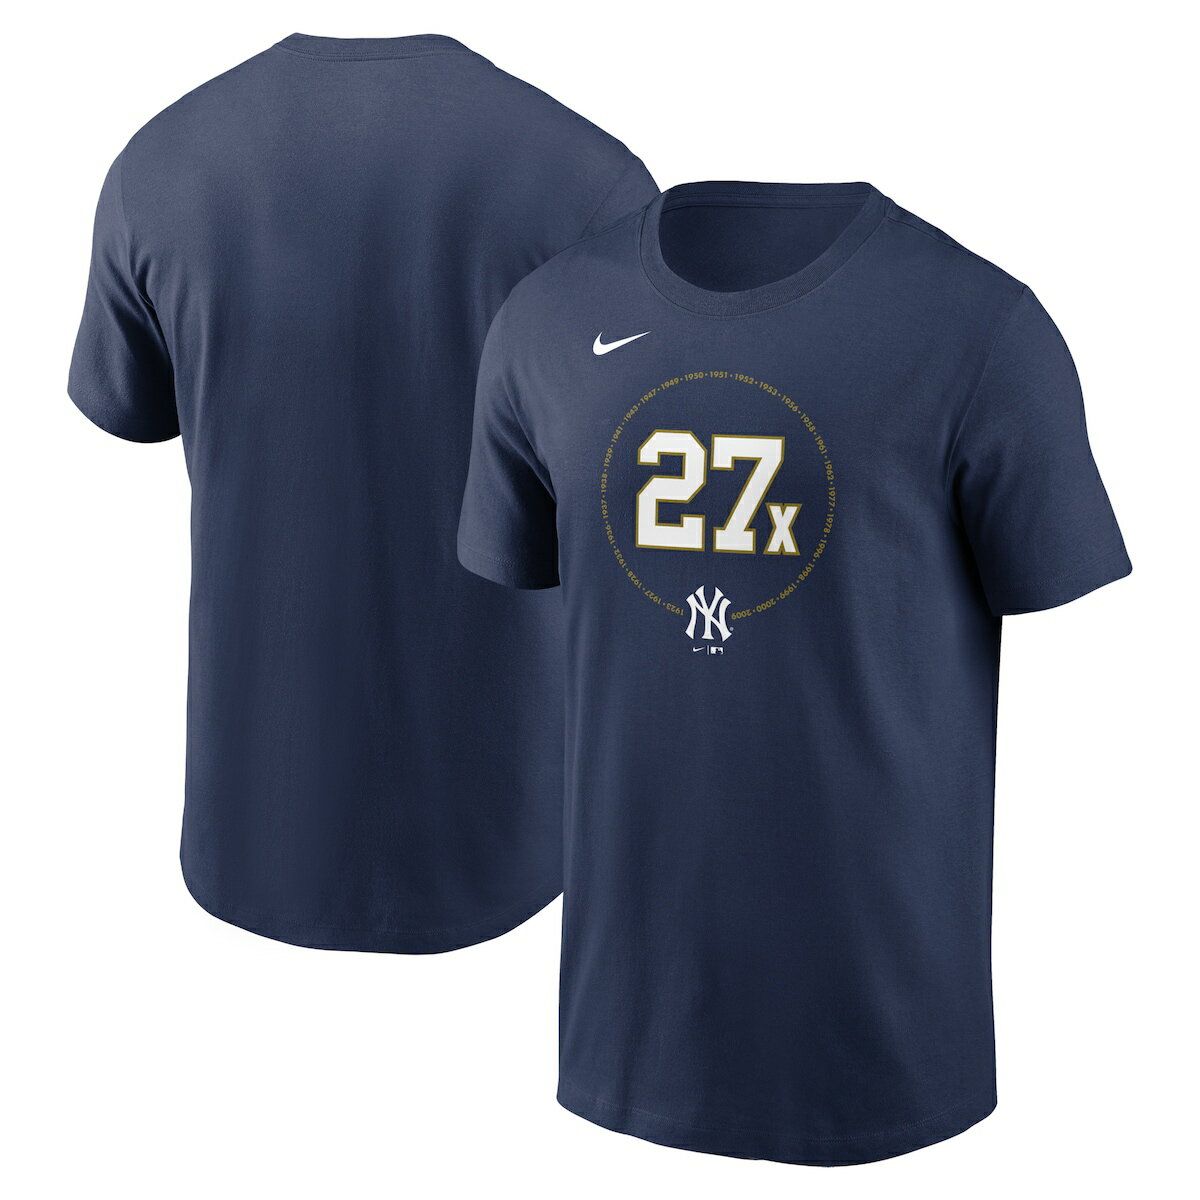 MLB L[X TVc Nike iCL Y lCr[ (2022 Mens Nike Local SS Cotton Tee)